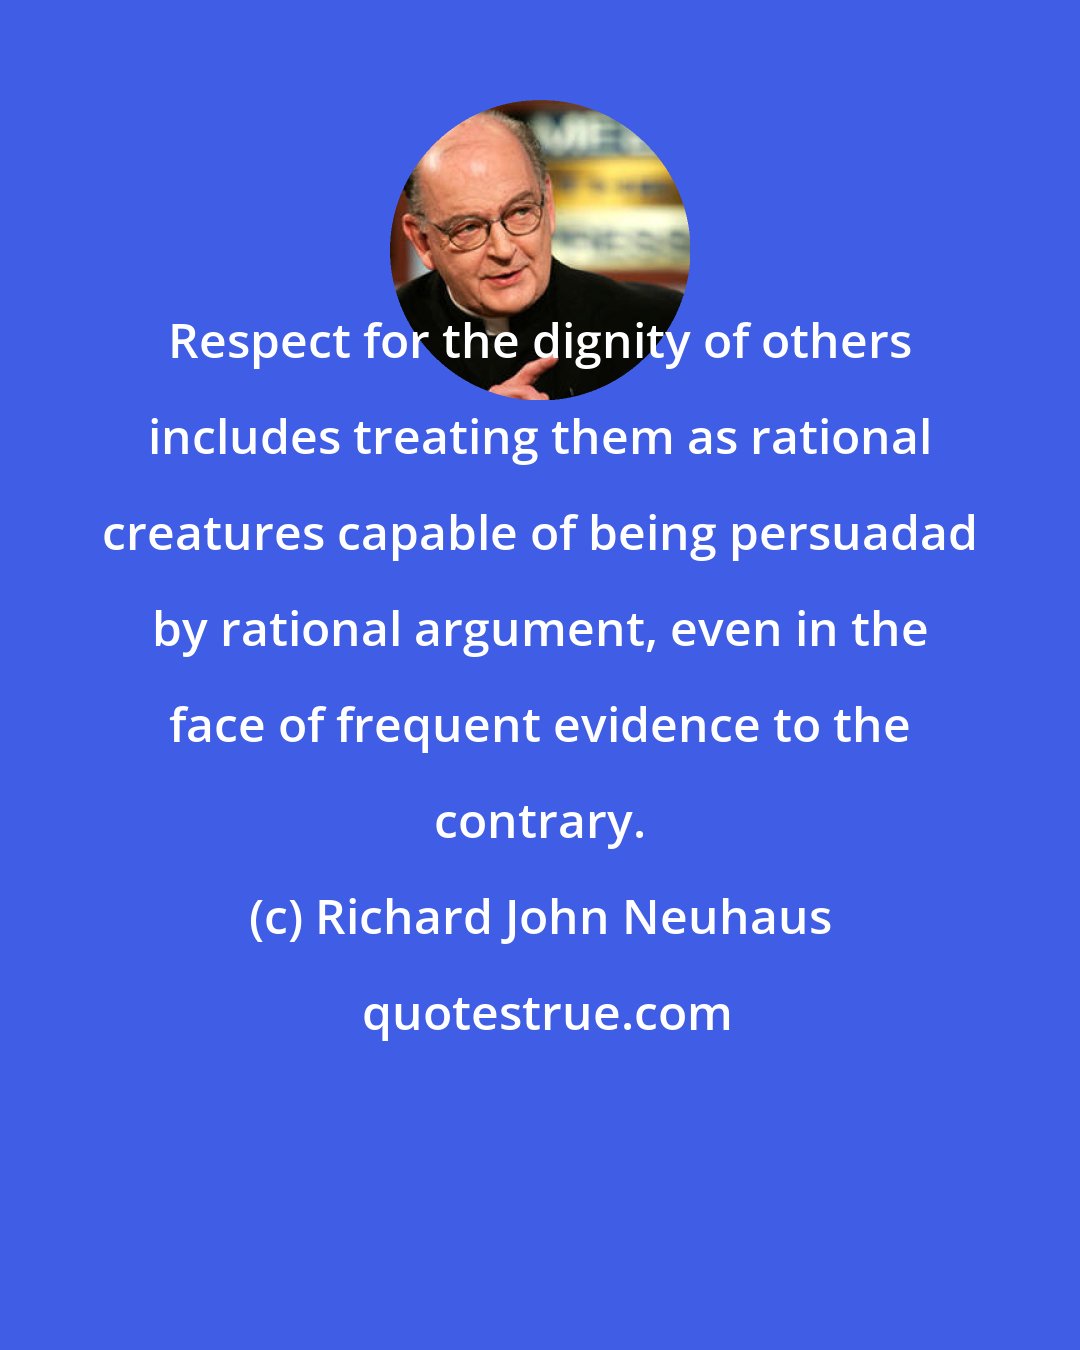 Richard John Neuhaus: Respect for the dignity of others includes treating them as rational creatures capable of being persuadad by rational argument, even in the face of frequent evidence to the contrary.